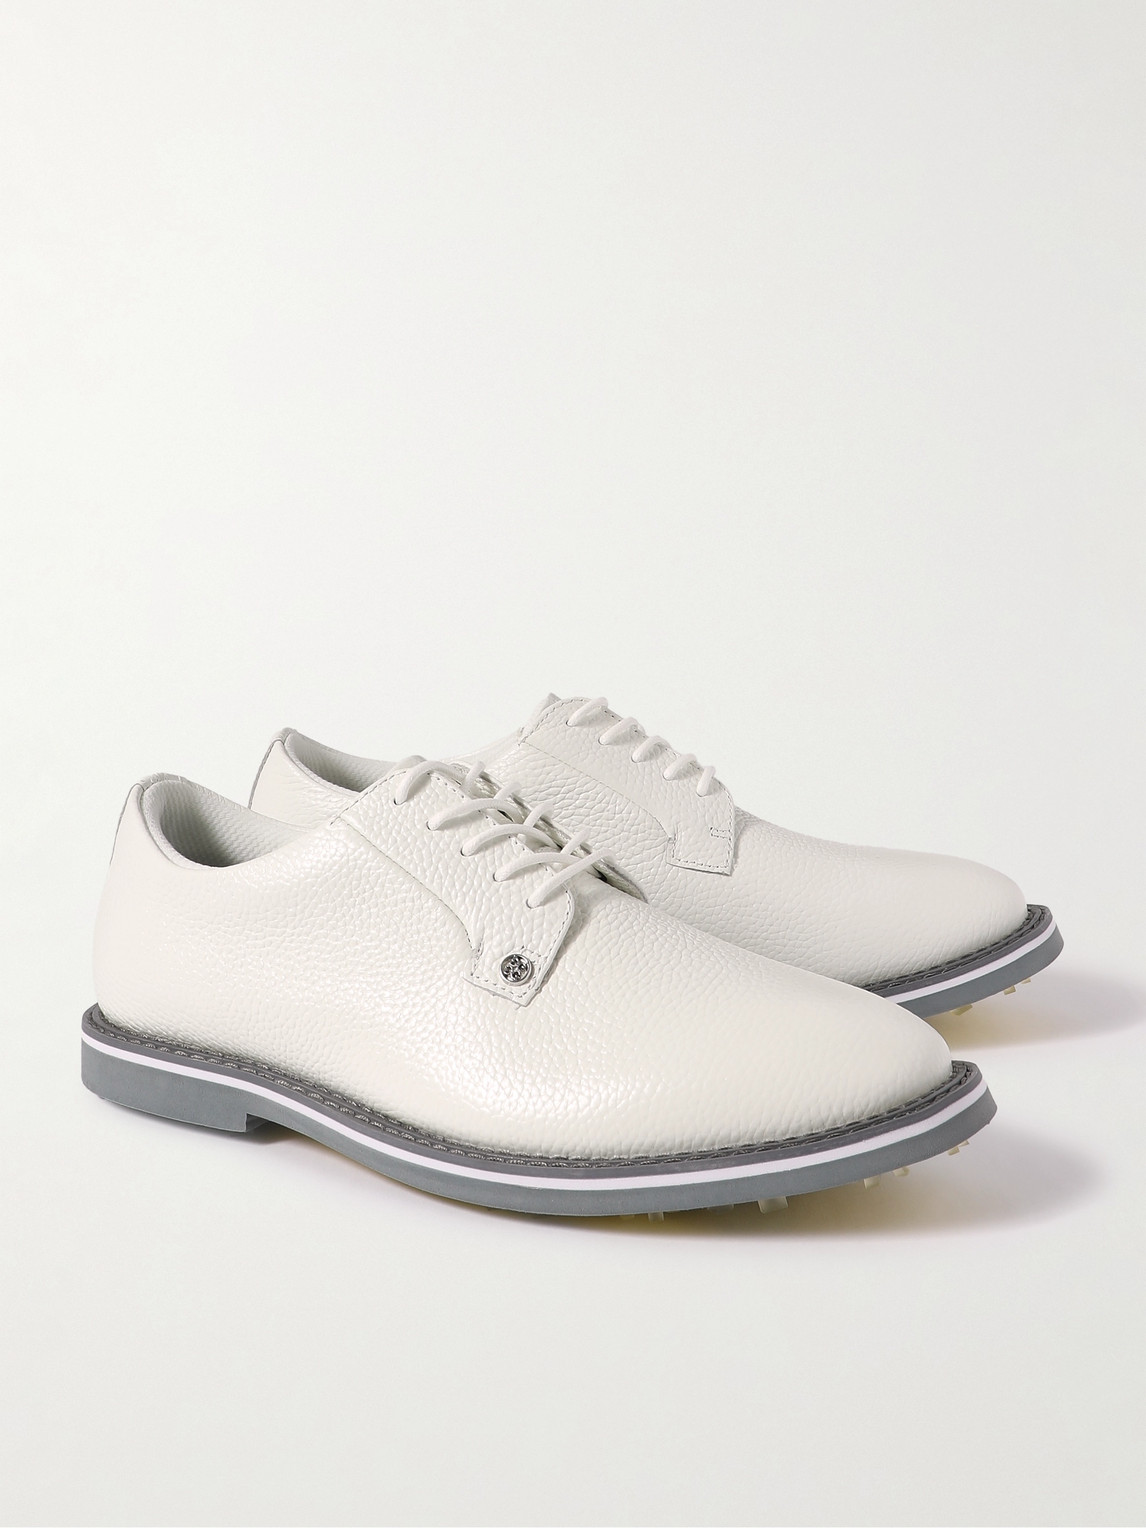 Shop G/fore Gallivanter Pebble-grain Leather Golf Shoes In White